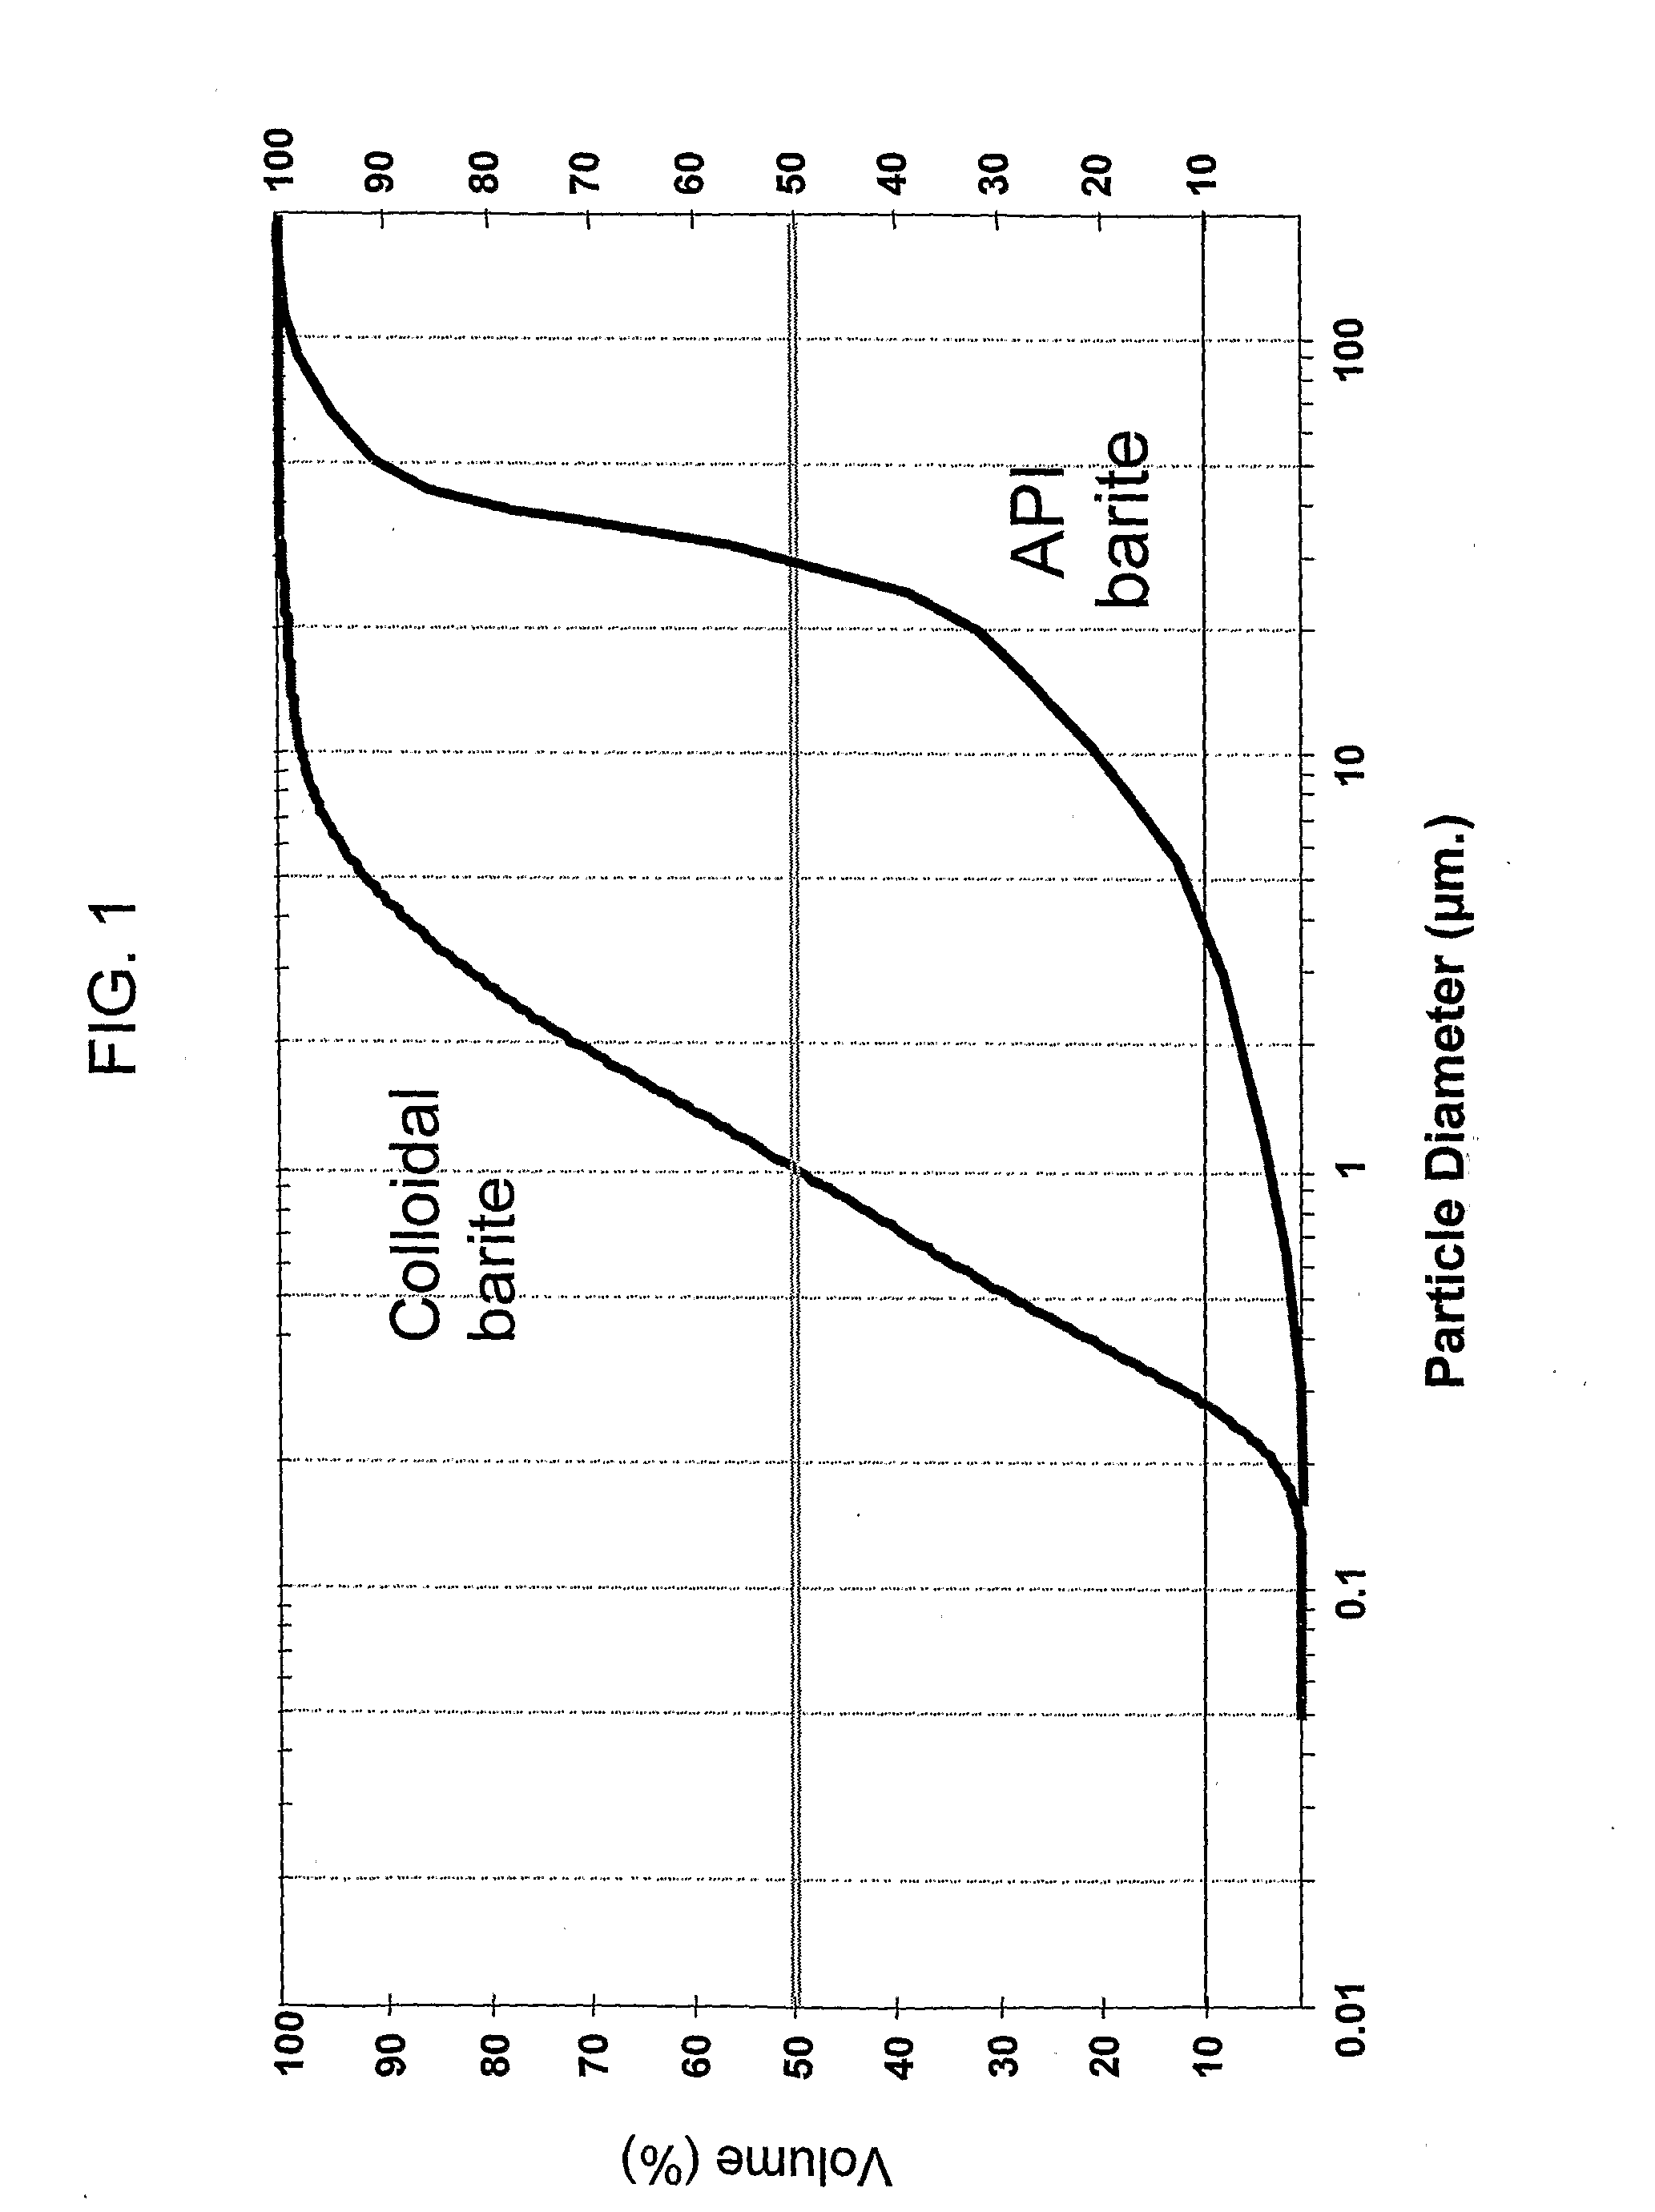 Additive For Reducing Torque On A Drill String